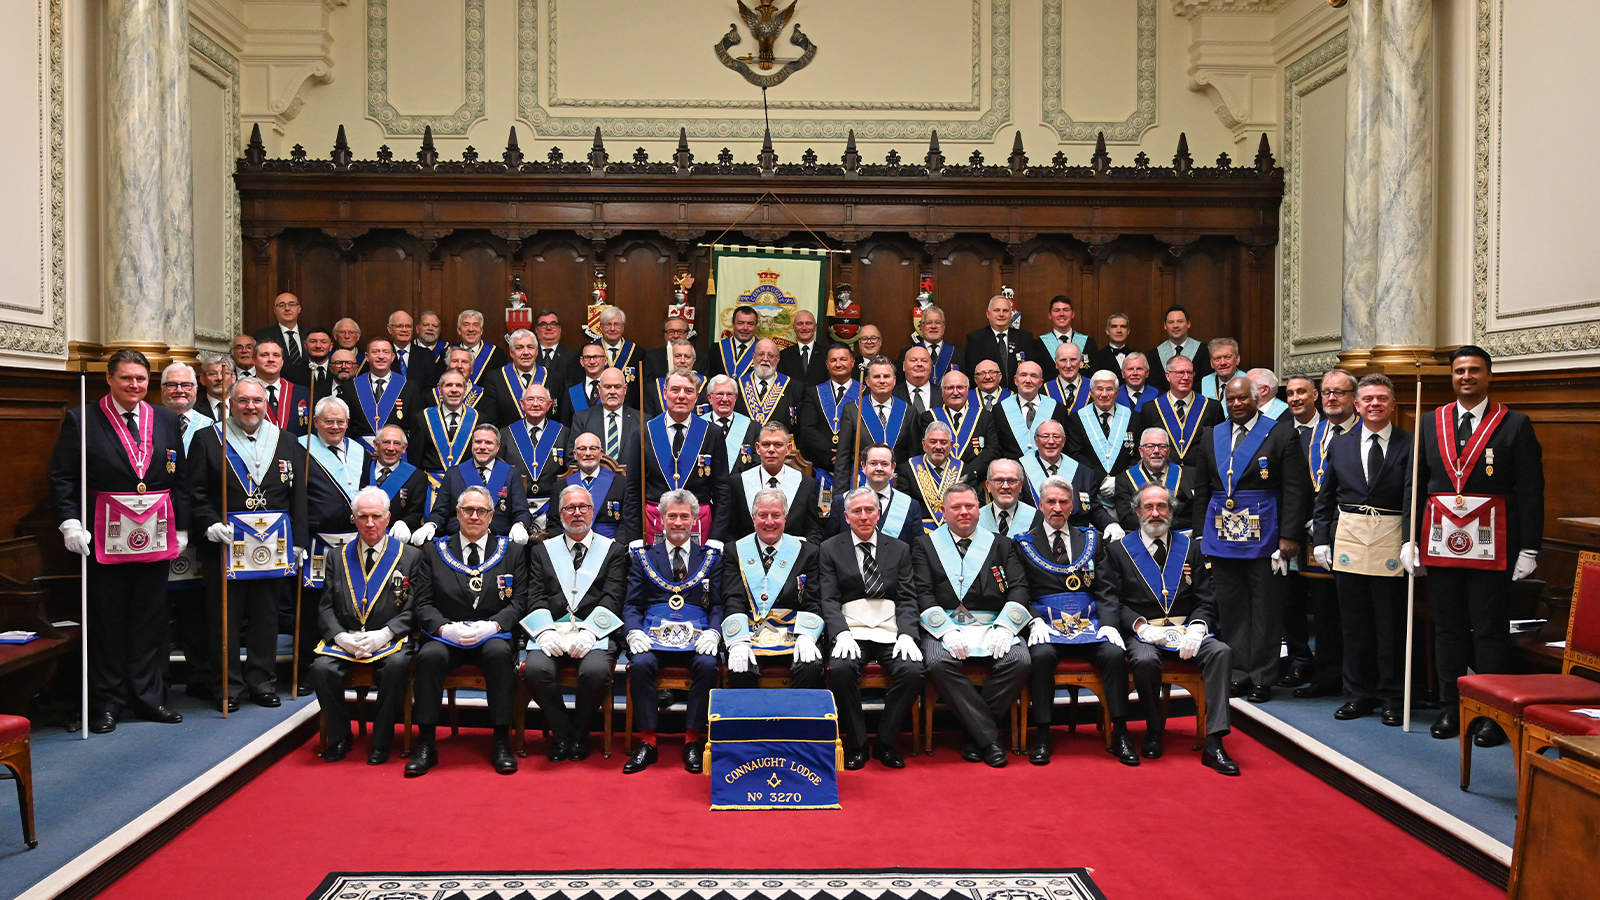 Connaught Lodge No. 3270 in full regalia, gather for a group photo.